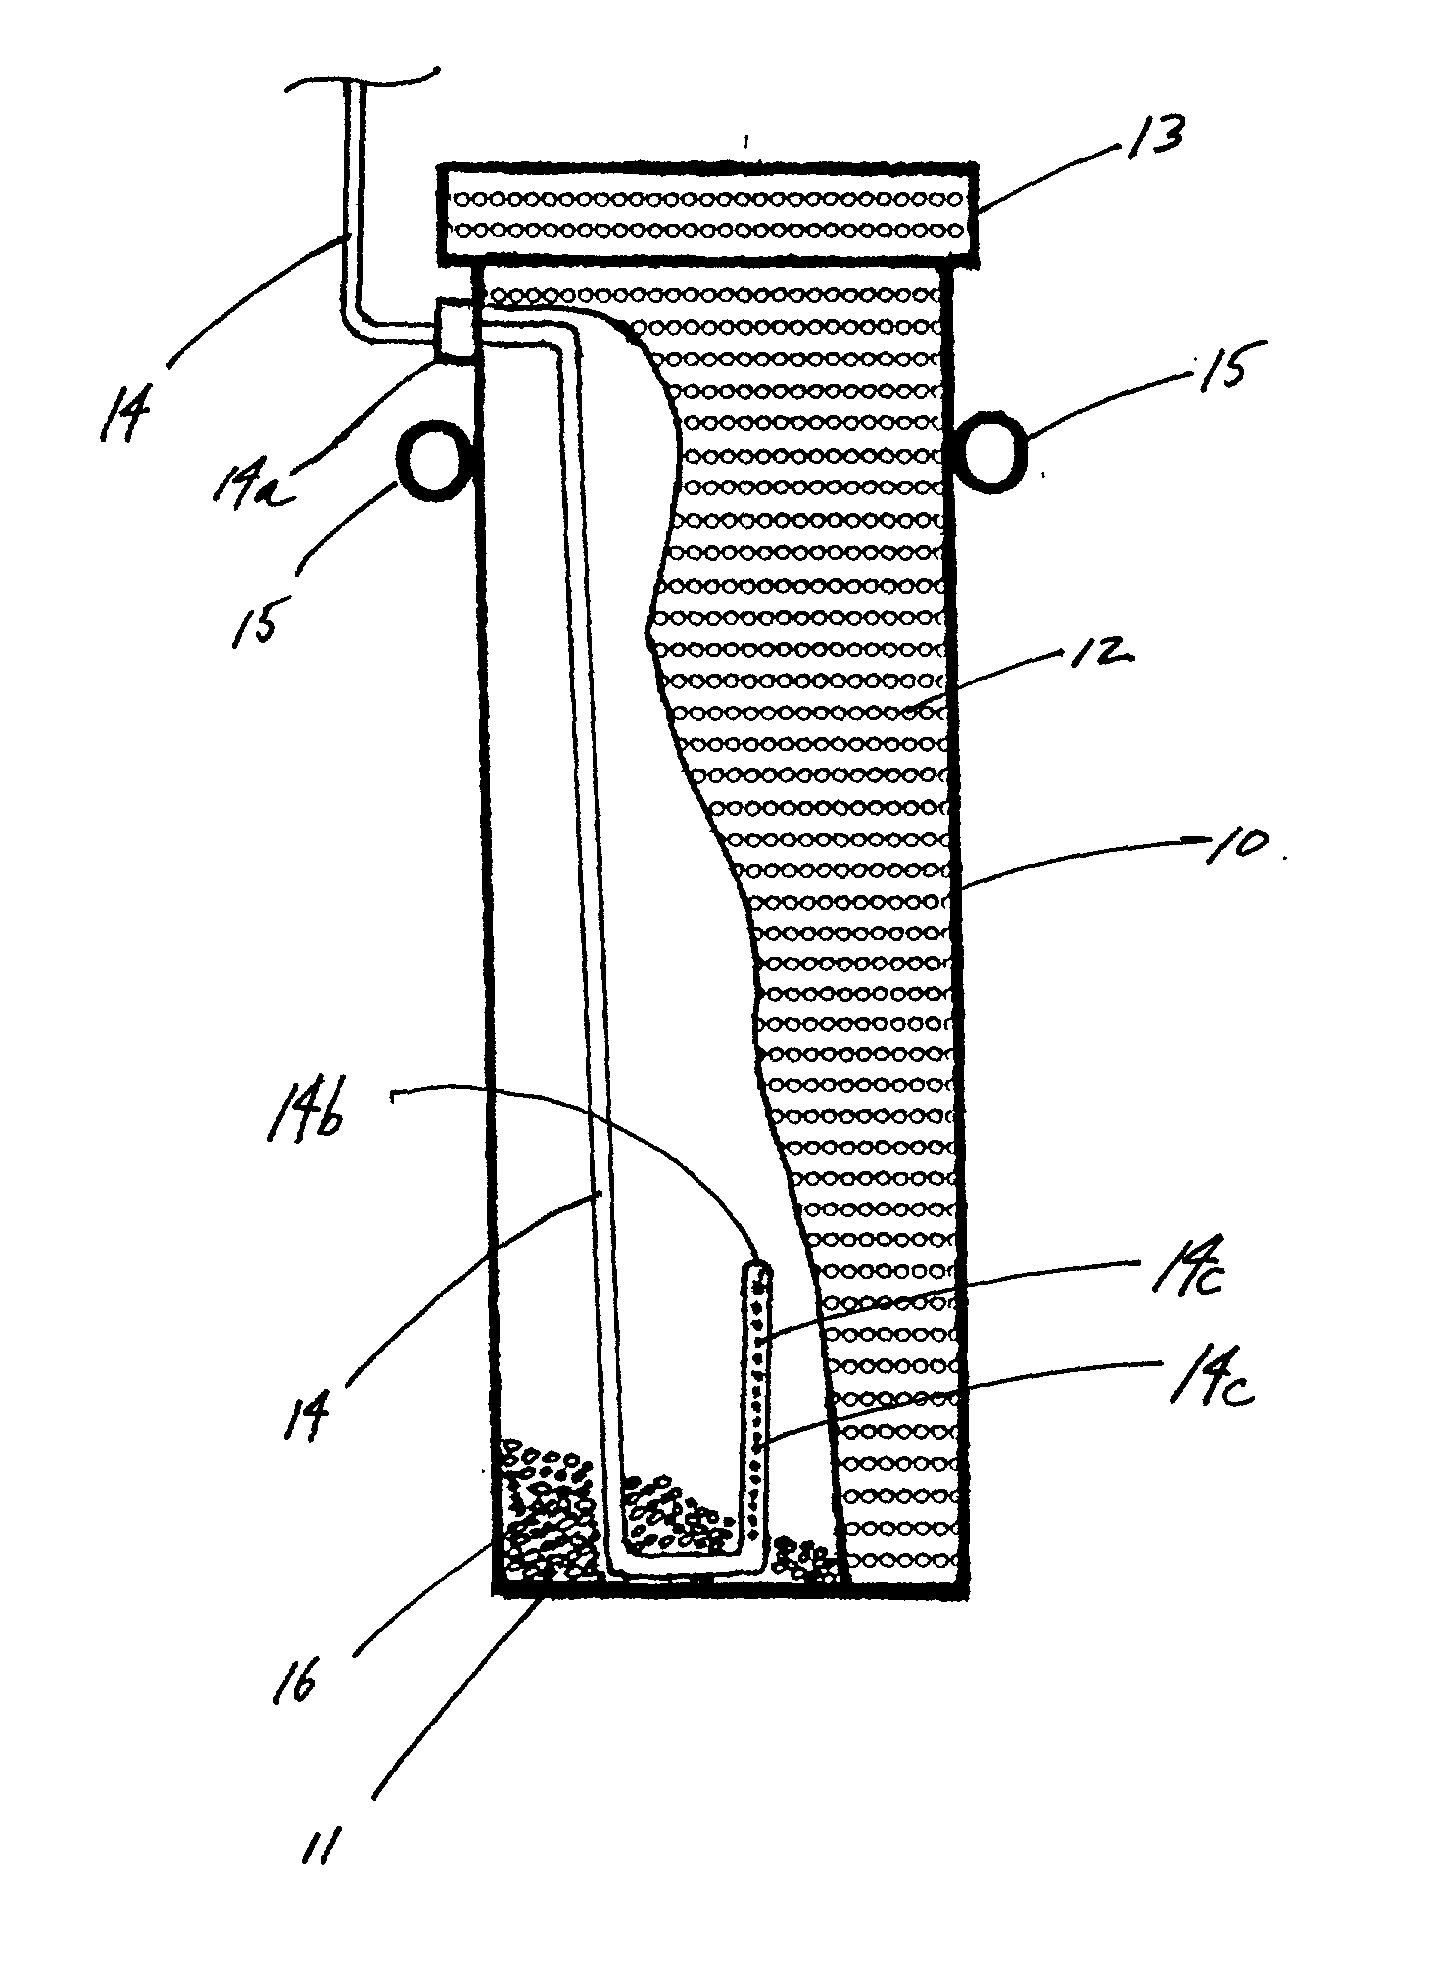 Method and apparatus for in-situ microbial seeding